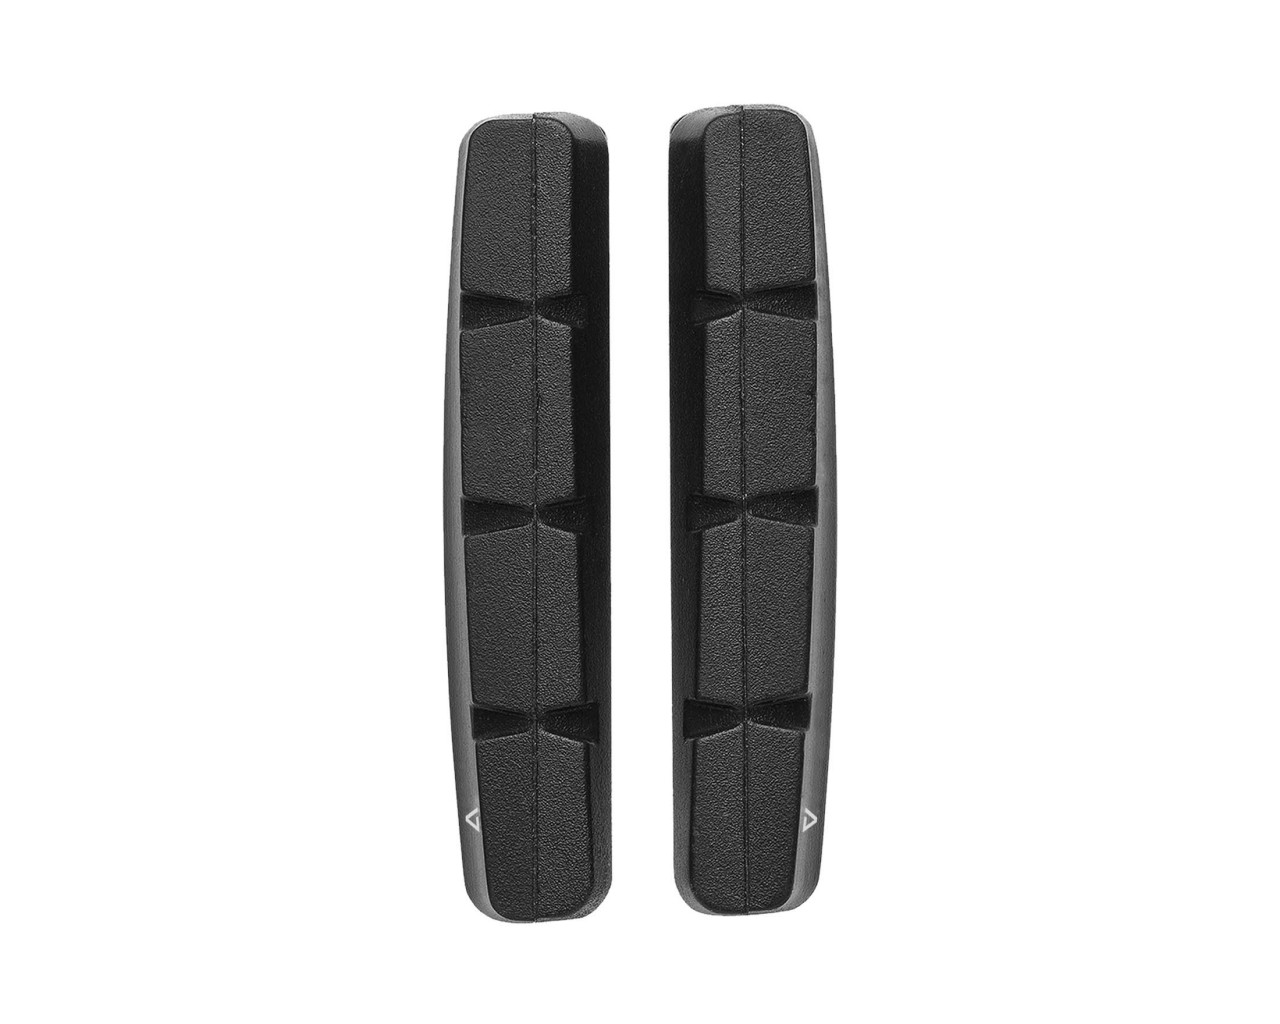 Cube Acid replacement pad set for two-piece brake shoe road bike